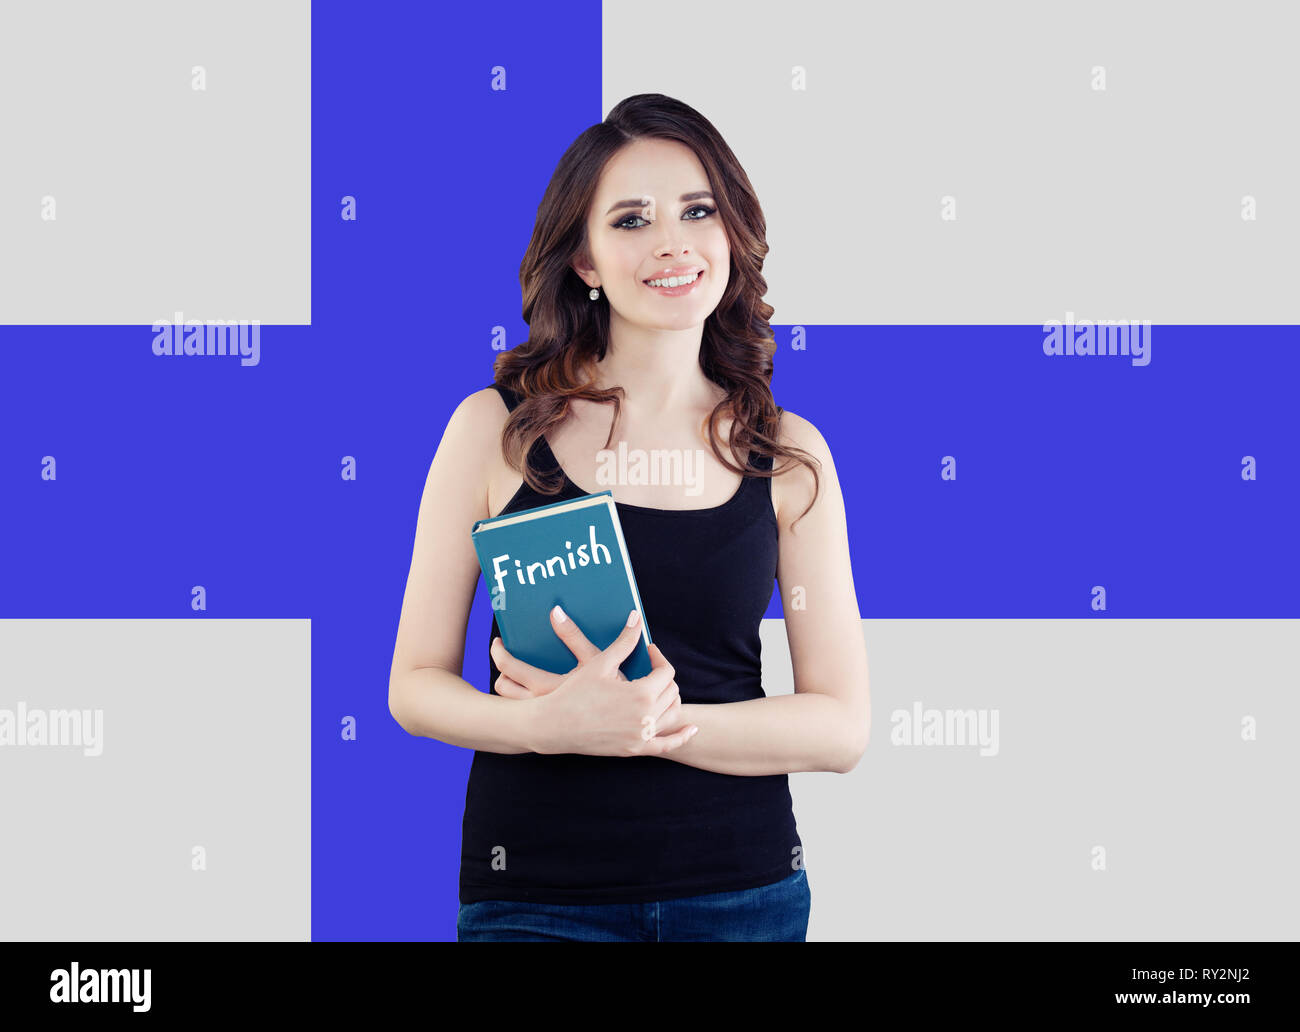 Travel in Finland and learn finnish language. Happy smiling woman holding phrasebook against the Finnish flag background Stock Photo